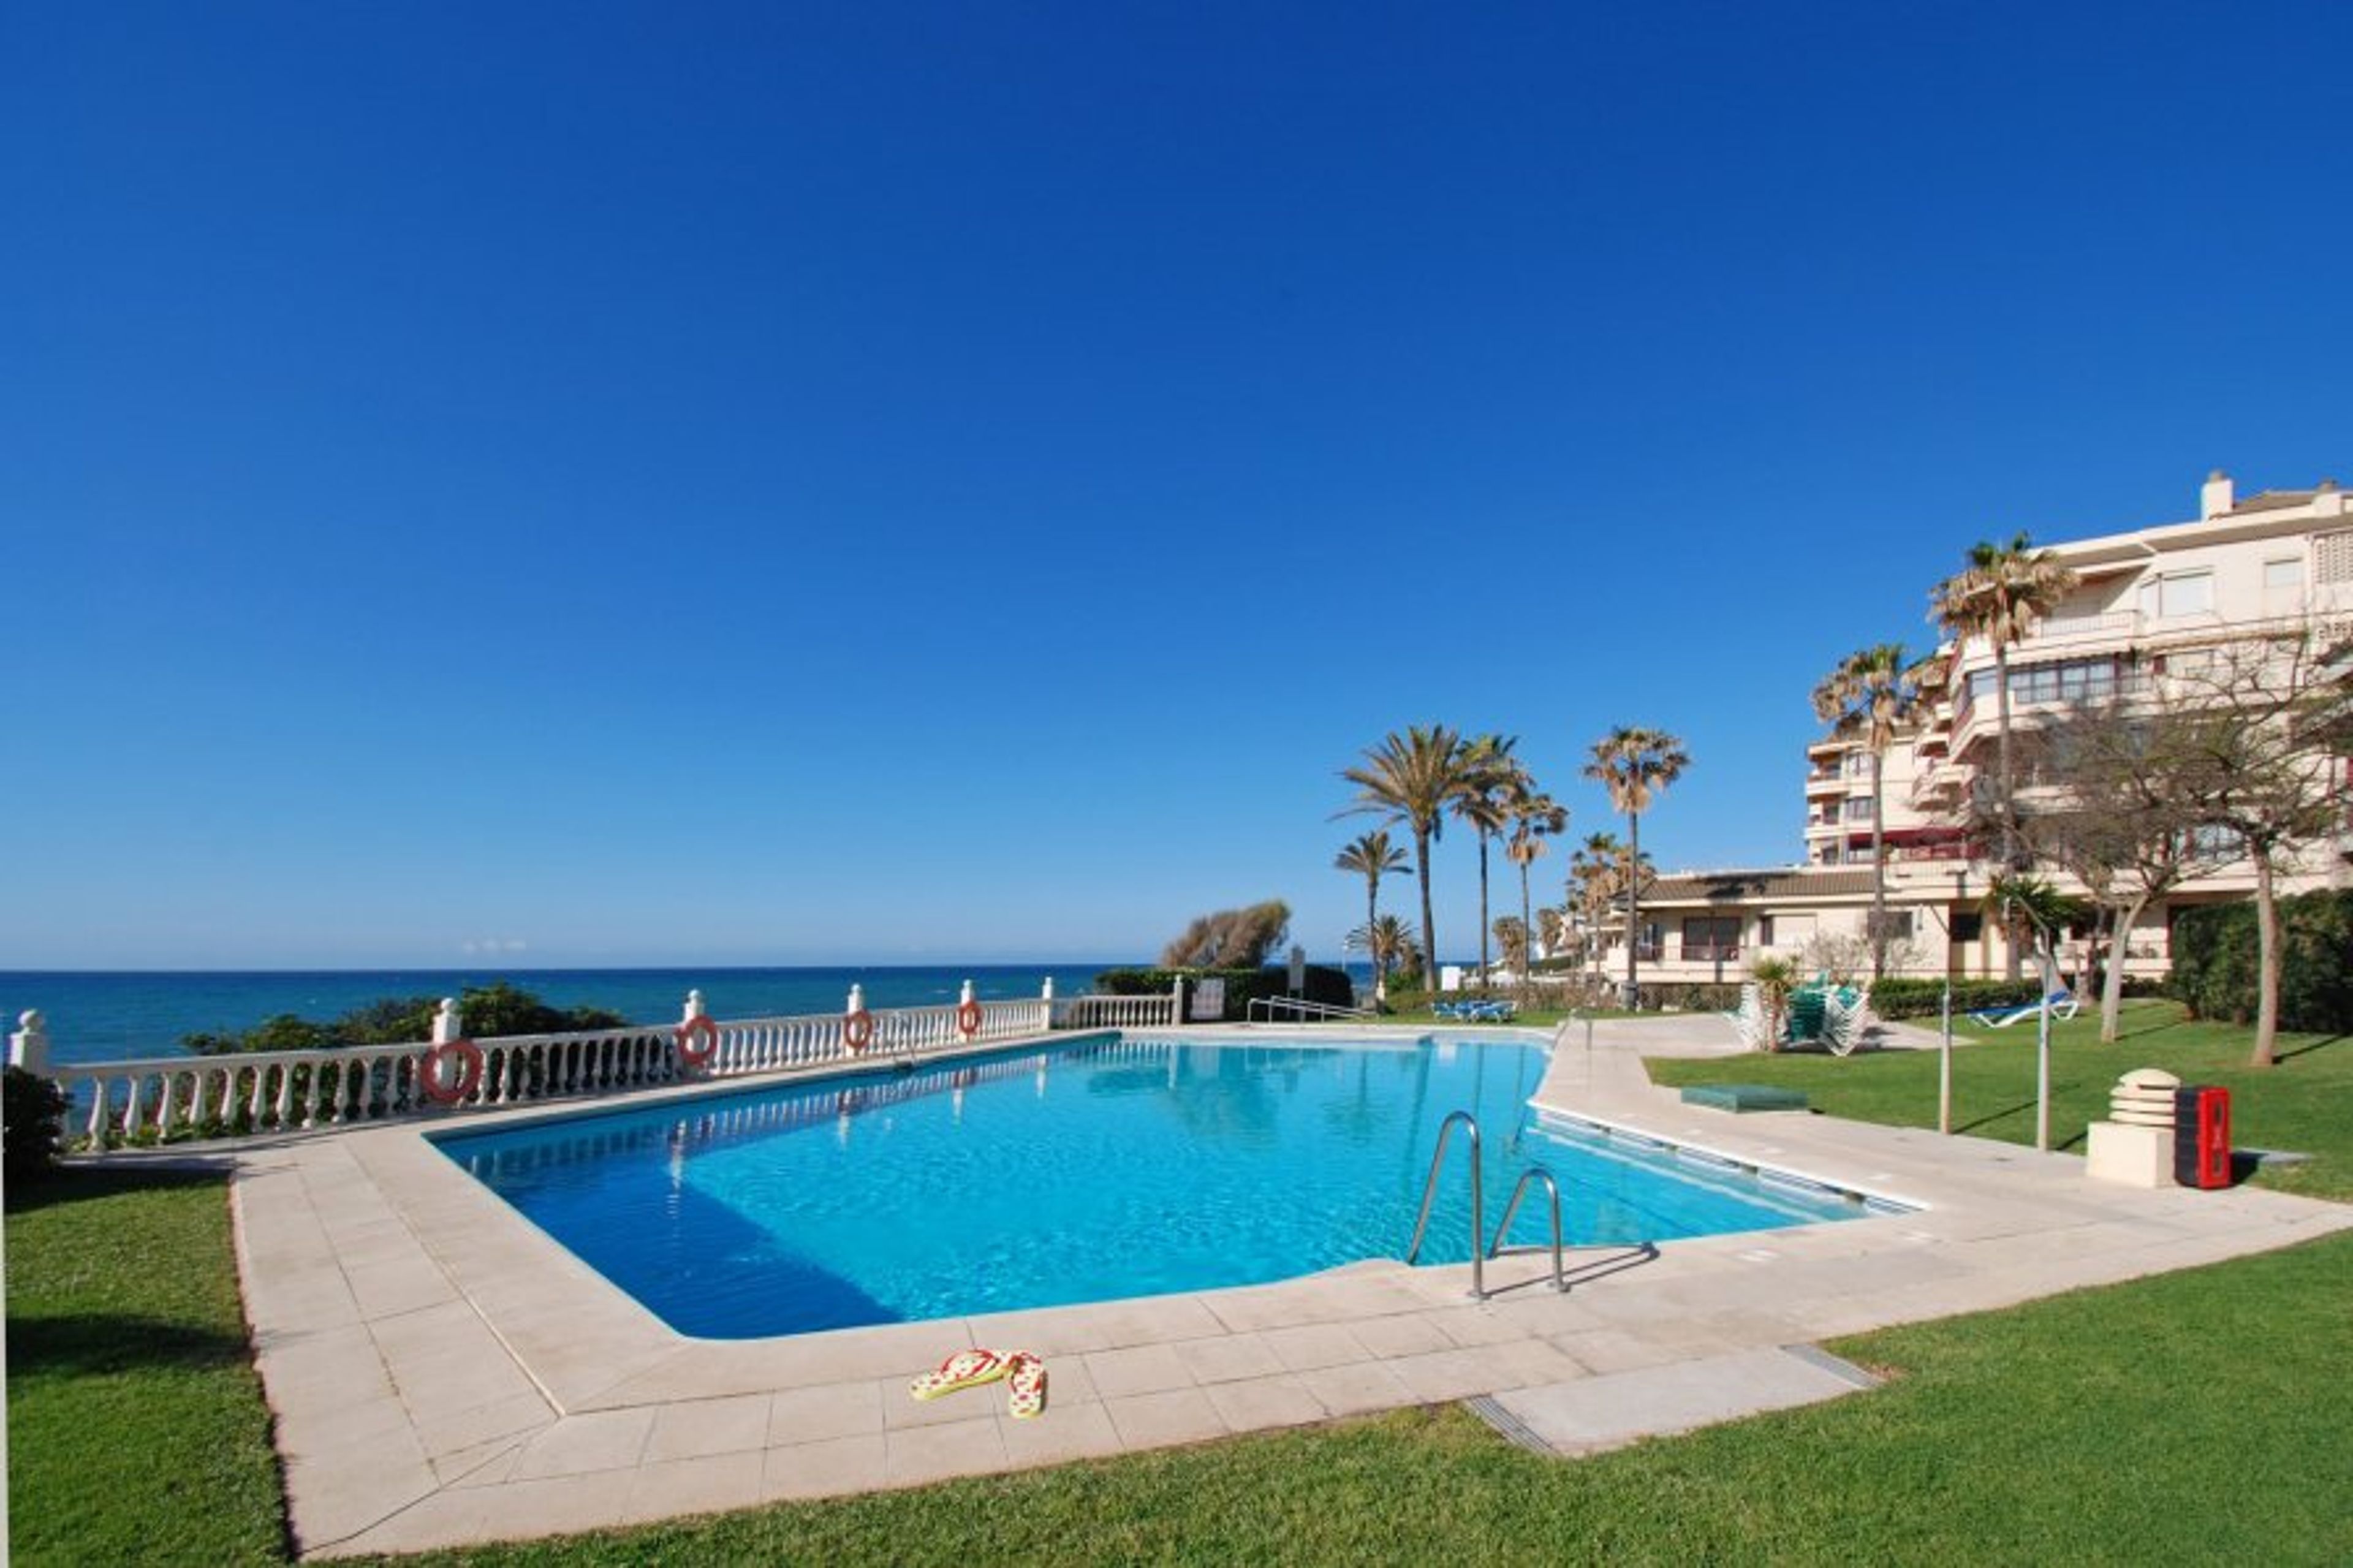 Beautiful communal pool that leads directly to the beach!